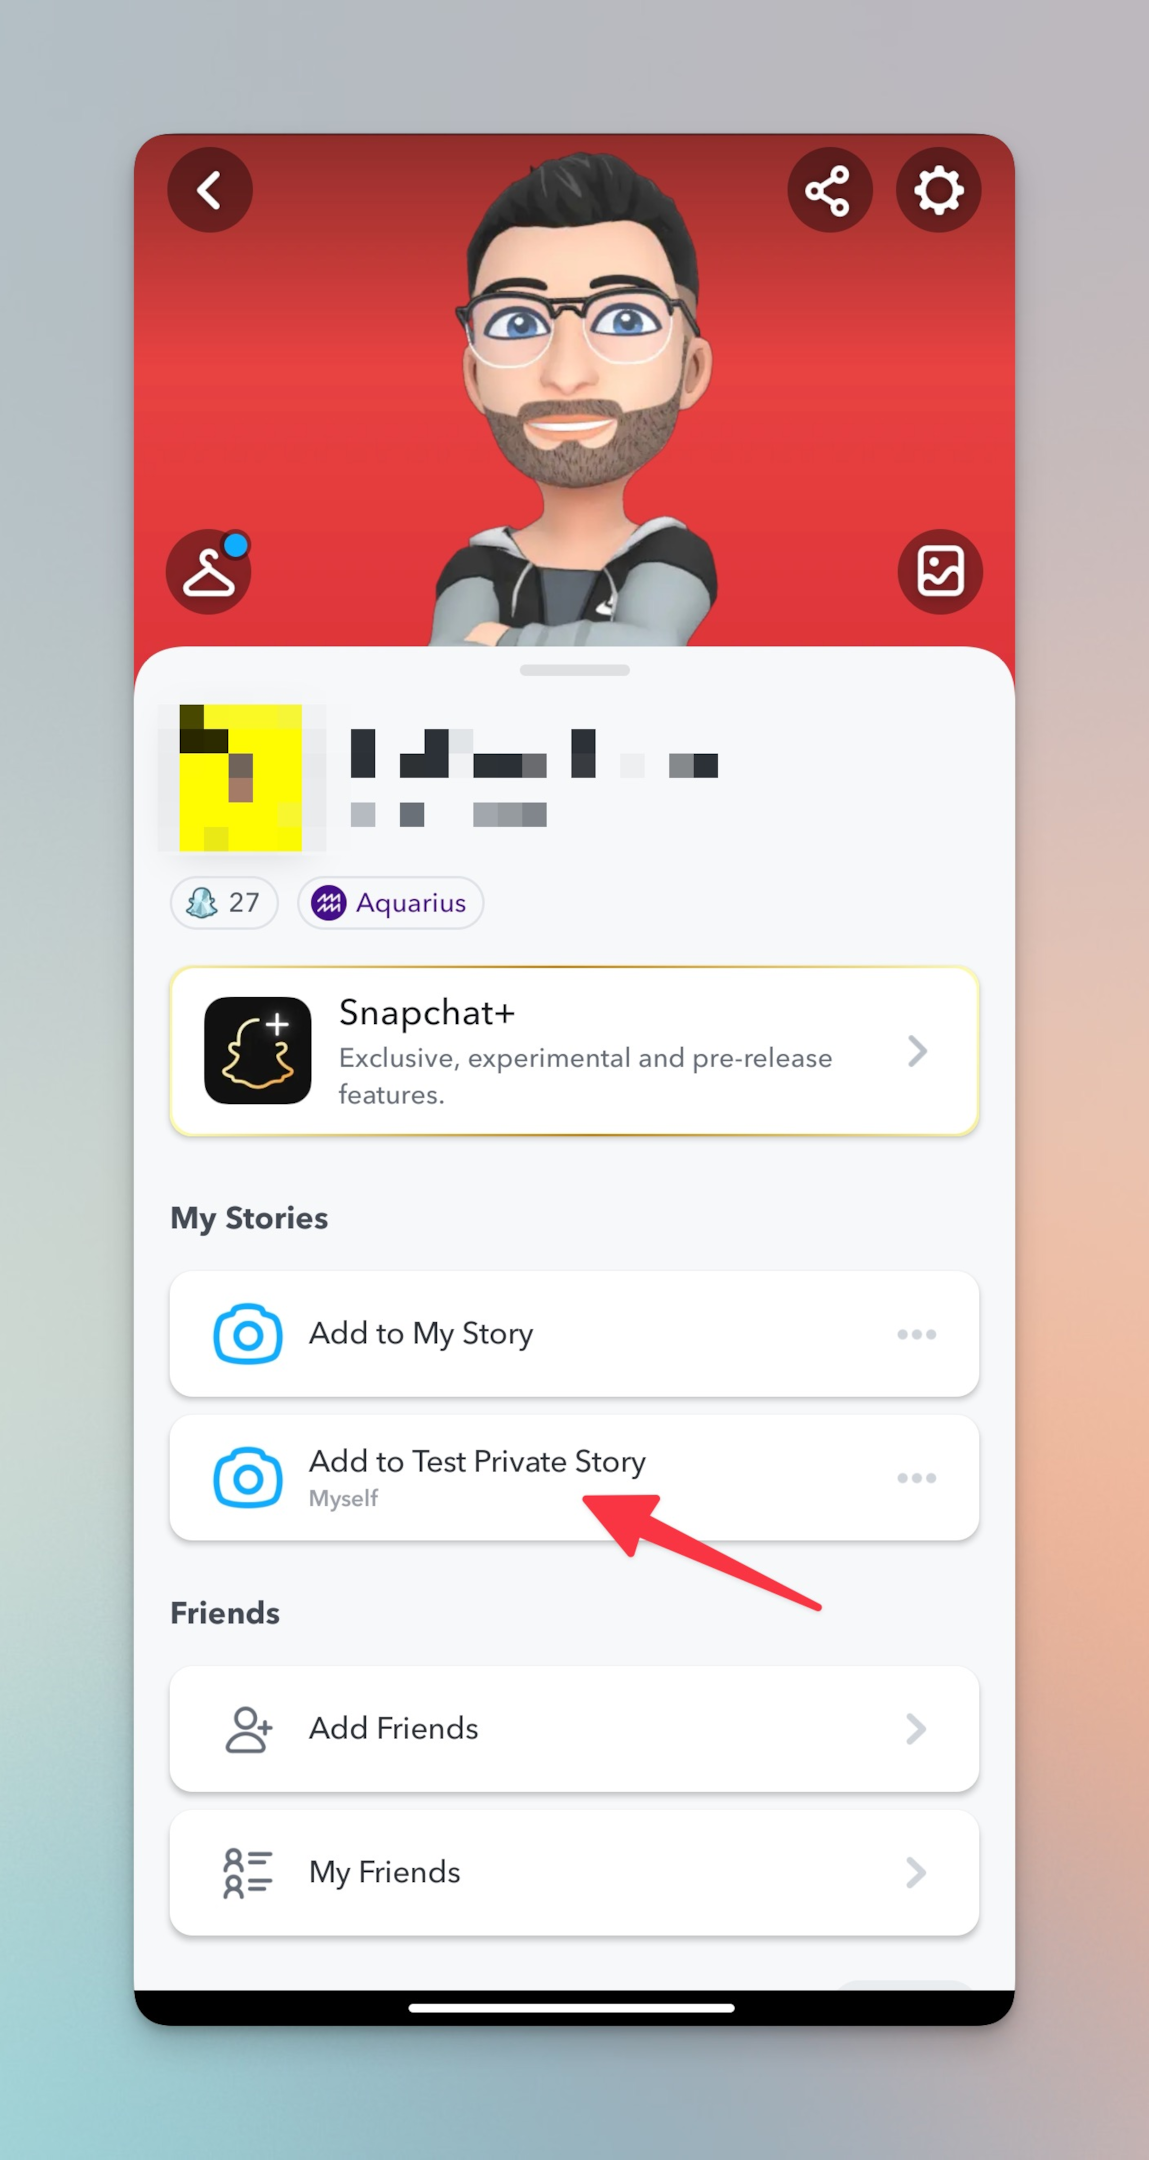 Remote.tools pointing to private story created under Snapchat account